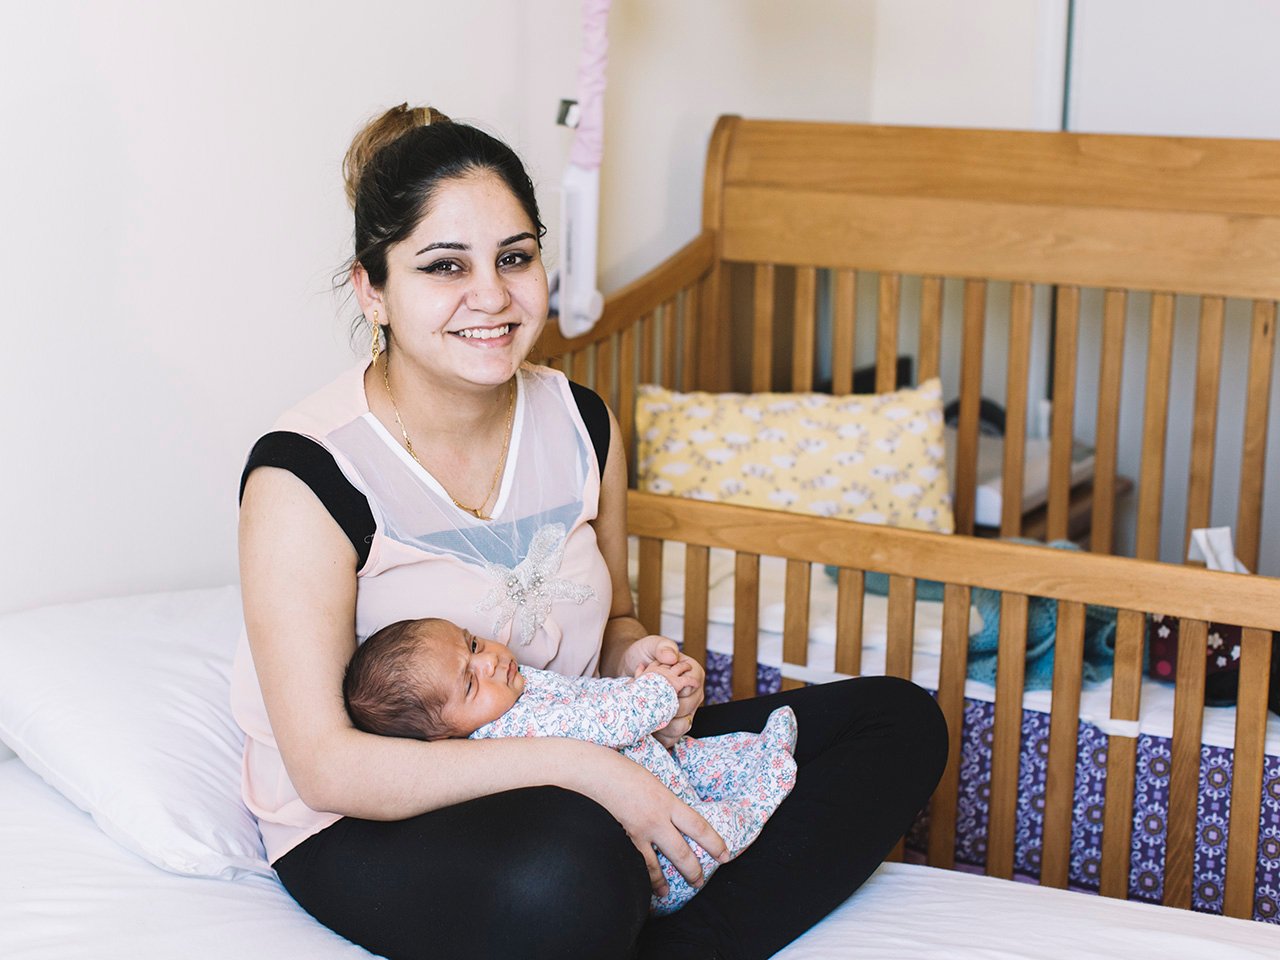 Three Syrian mothers on giving birth and starting over in Canada